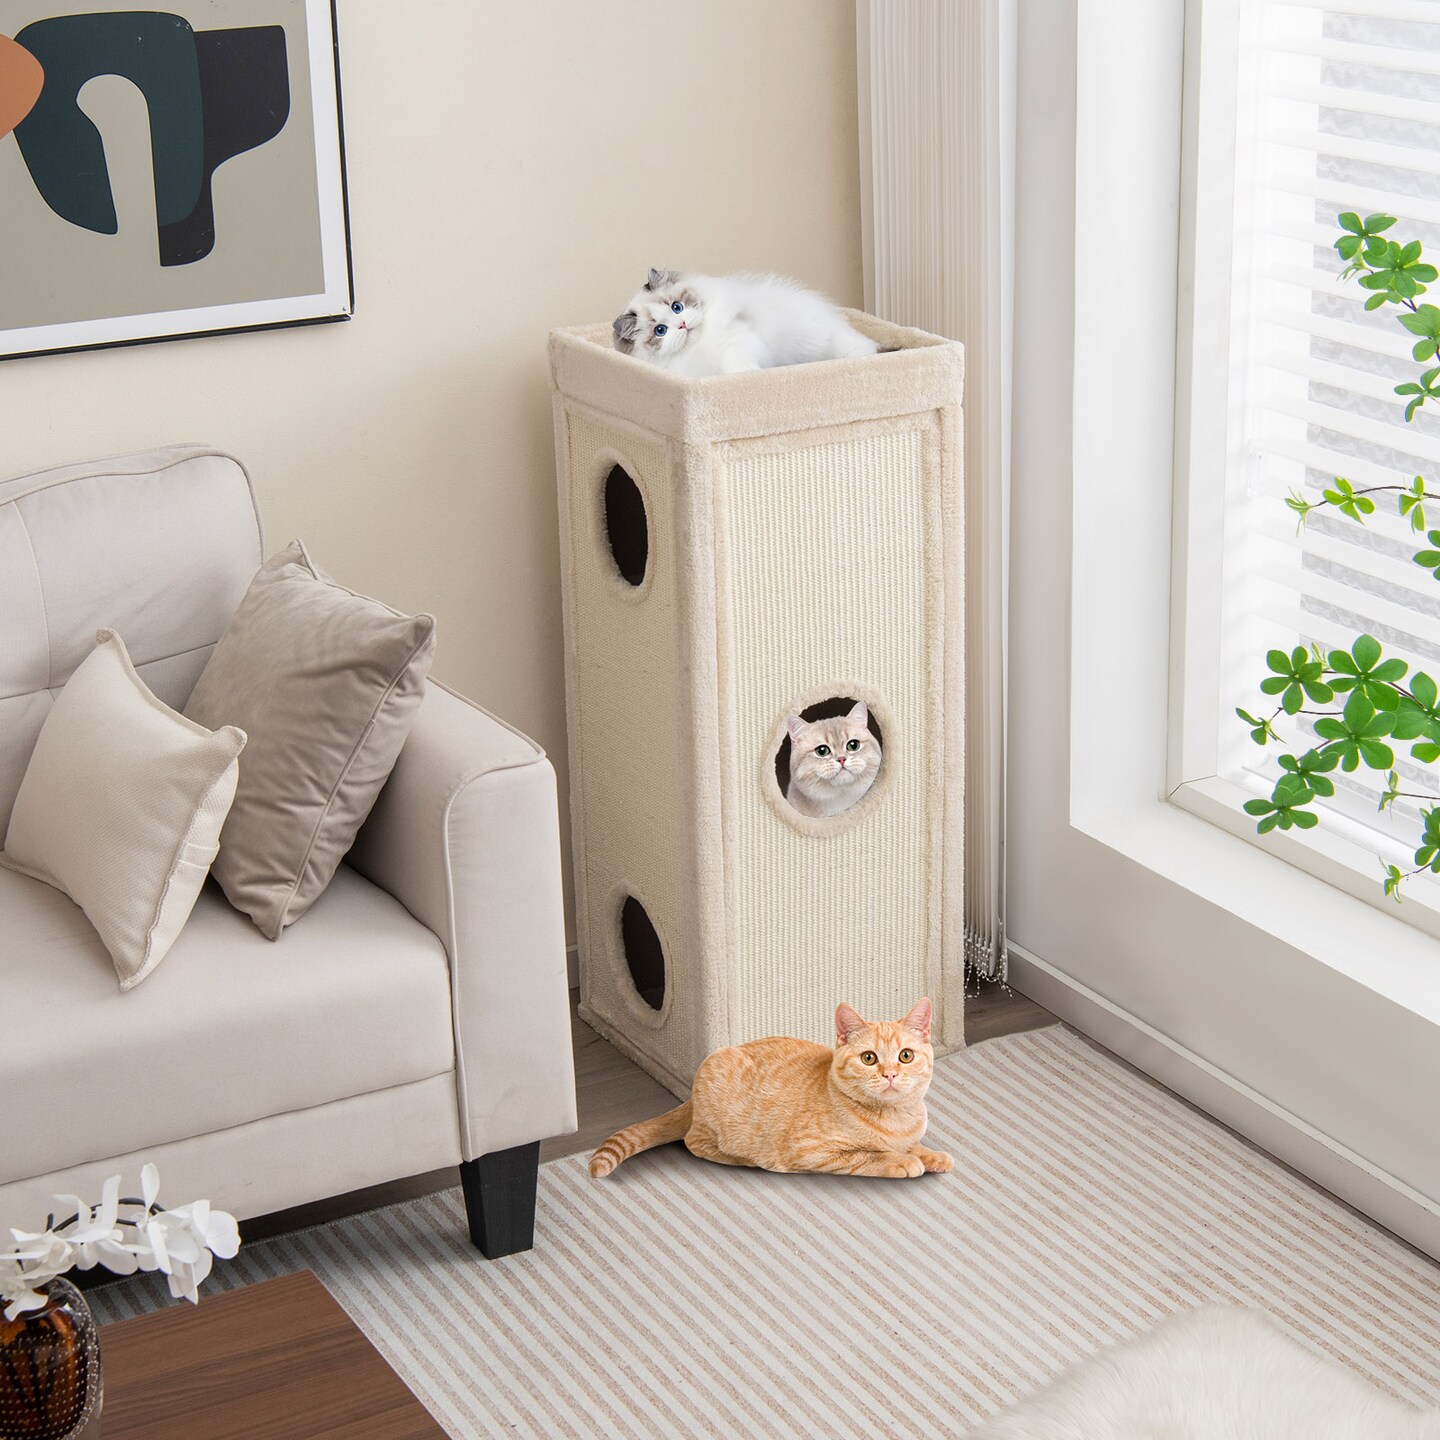 Costway 4-Story Cat House 39&#x27;&#x27; Cat Condo with Scratching Posts &#x26; 4 Soft Plush Cushions Gray/Natural